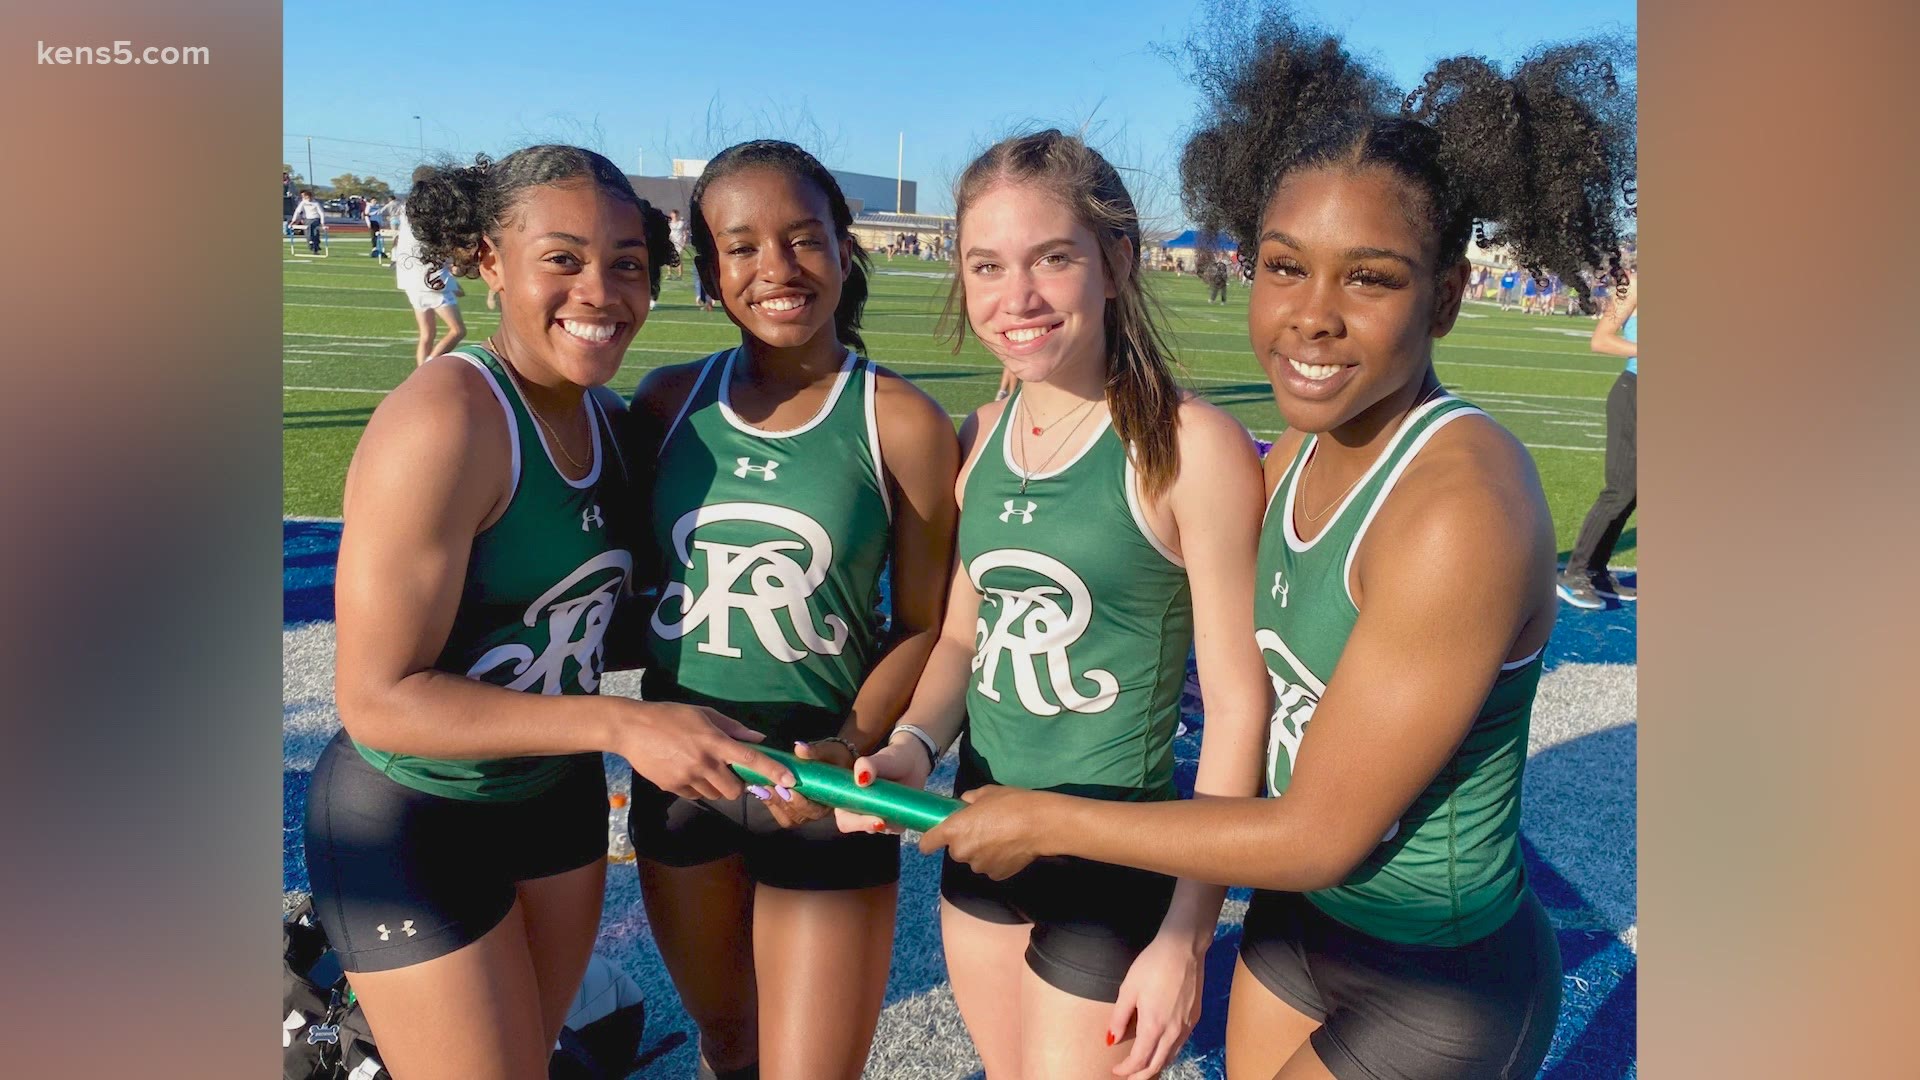 The Rattlers' 400-meter relay team has high hopes and confidence heading into state.